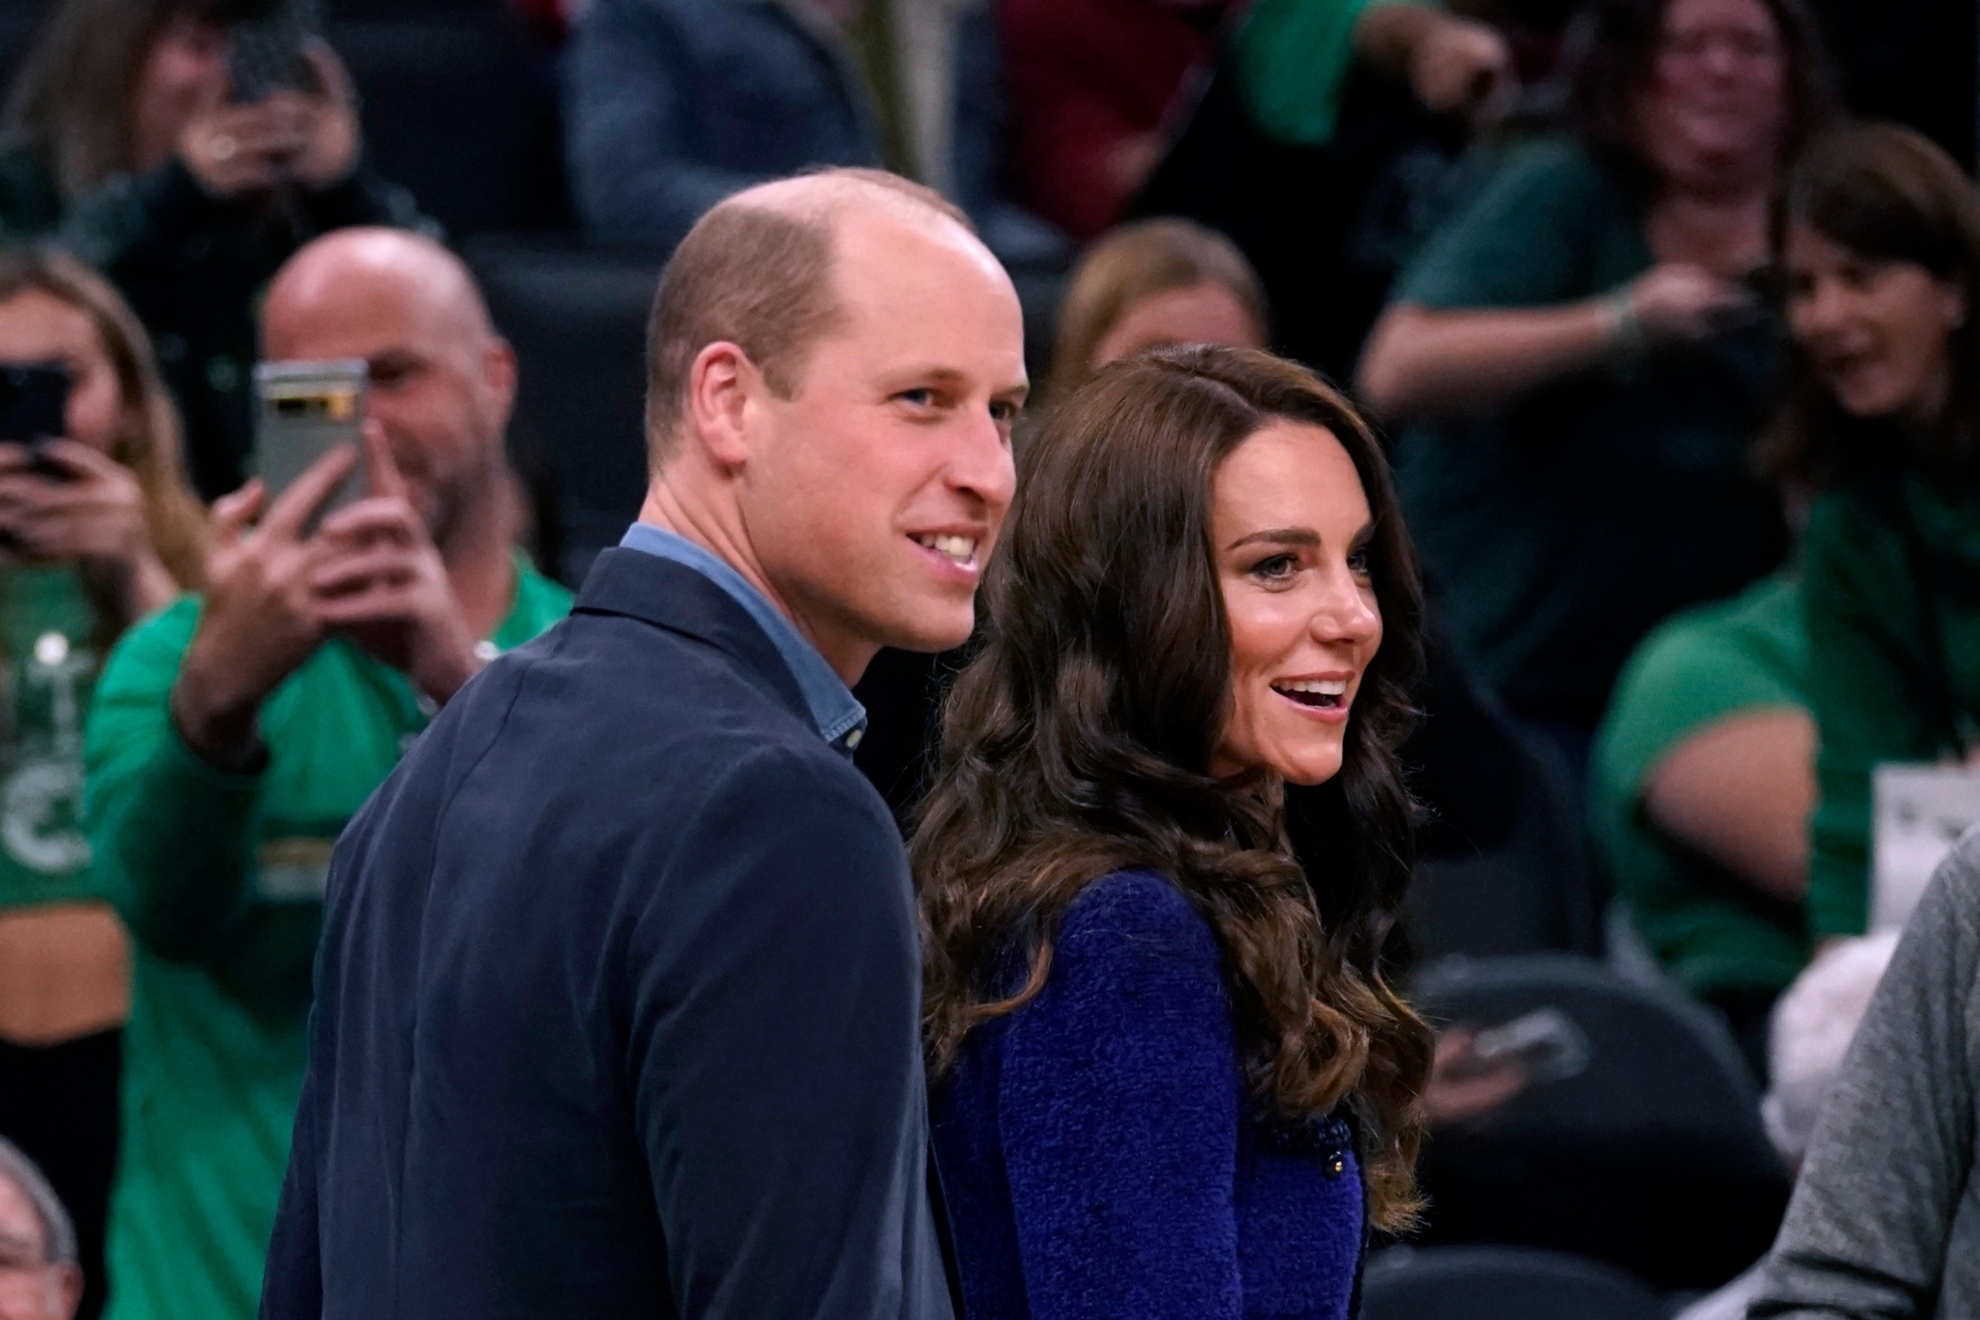 Britain's Prince William and Kate, Princess of Wales, arrive for an NBA basketball game between the Boston Celtics and the Miami Heat